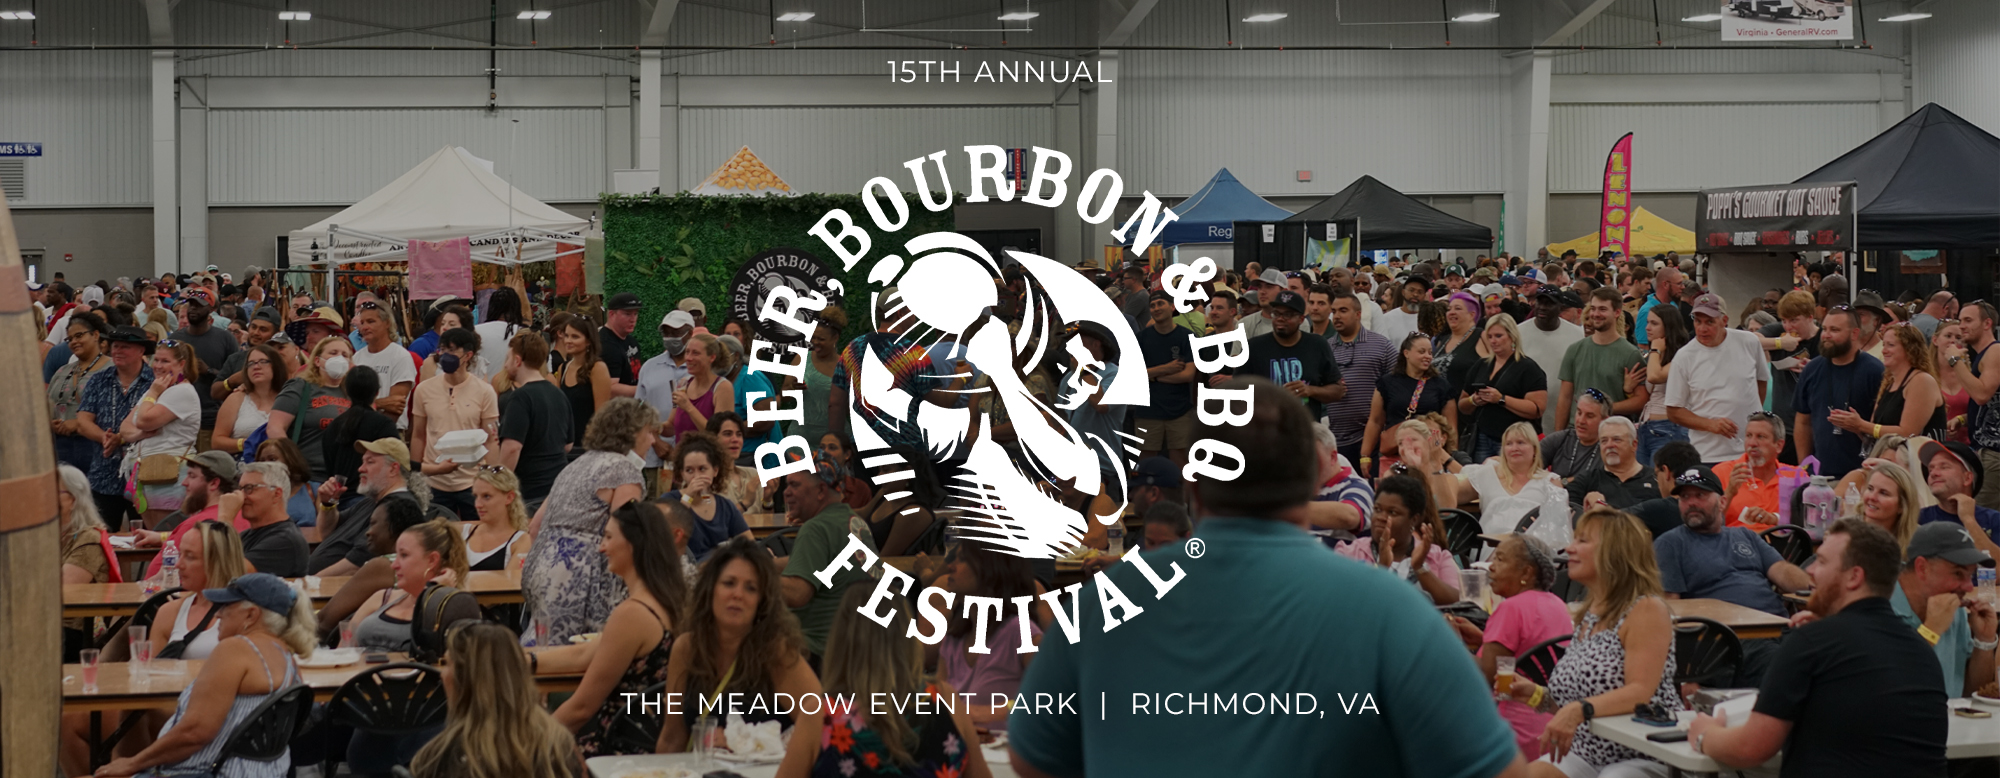 Beer, Bourbon and BBQ Festival - Richmond banner image